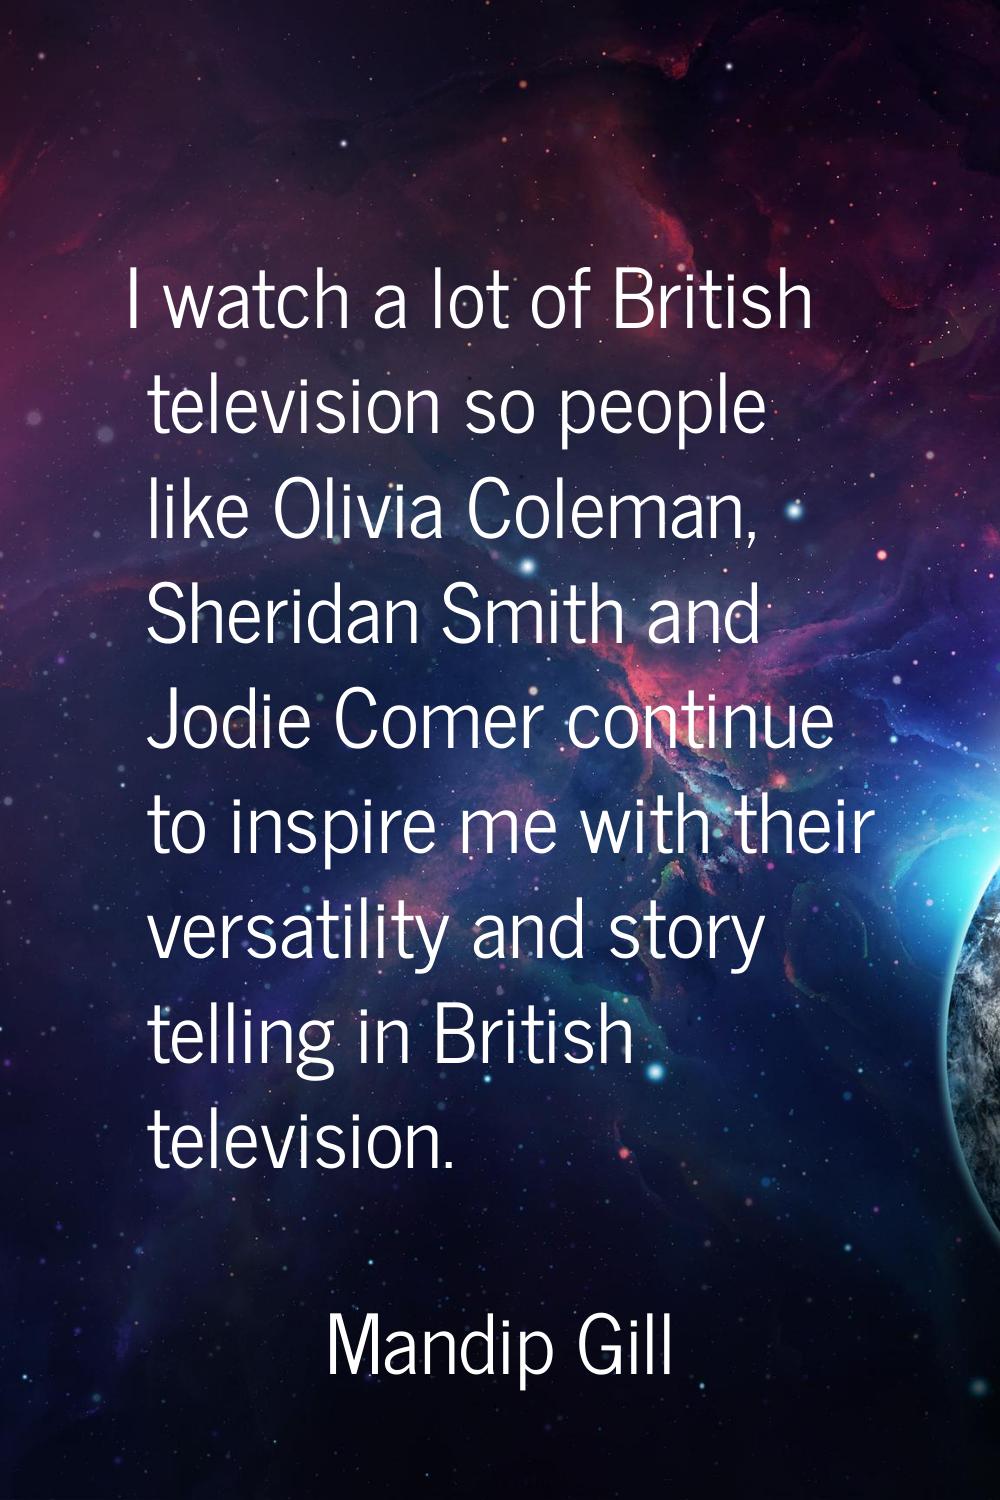 I watch a lot of British television so people like Olivia Coleman, Sheridan Smith and Jodie Comer c